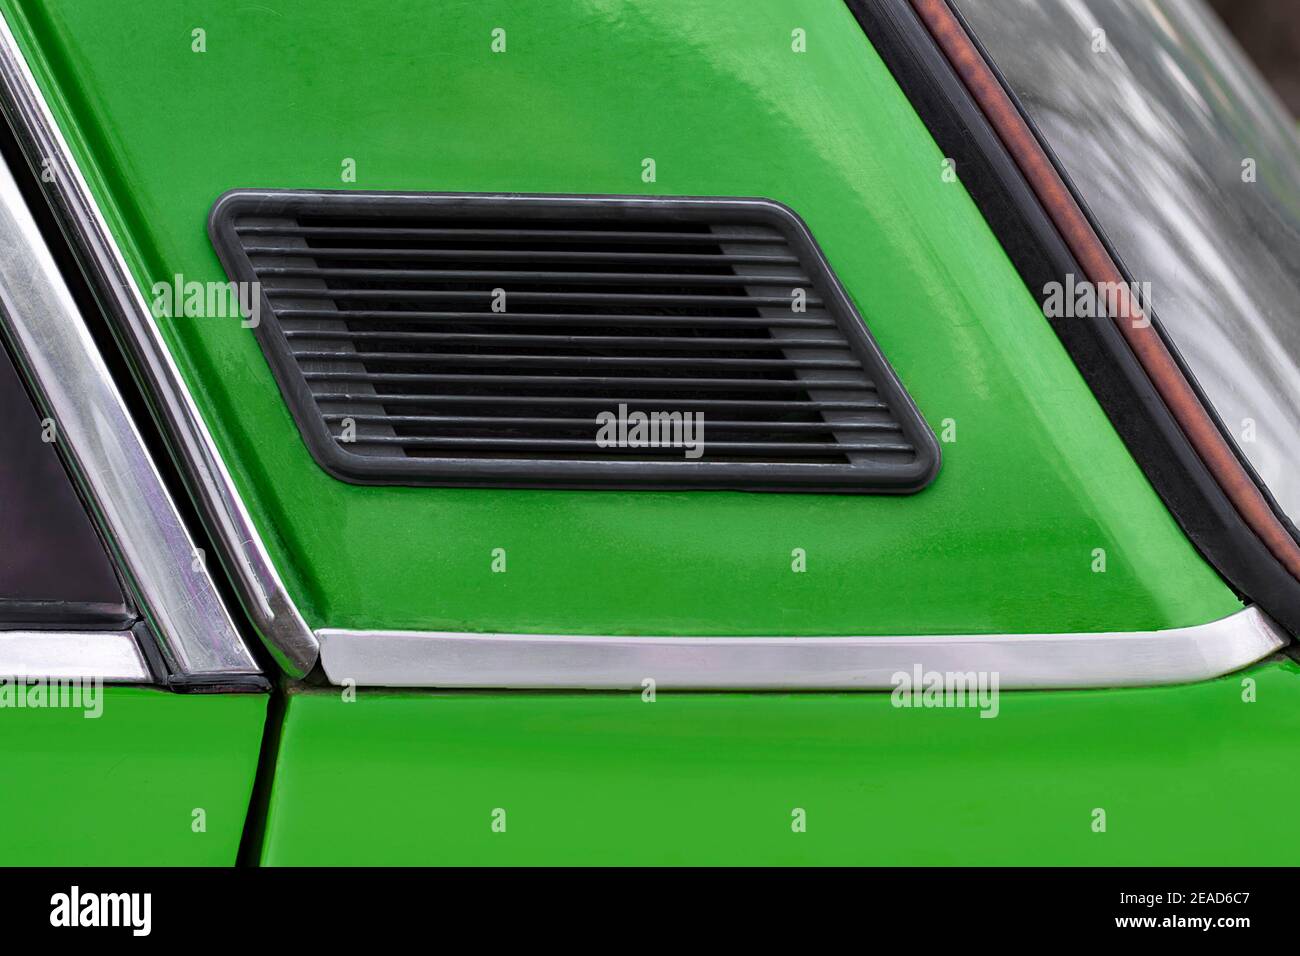 456 Car Ventilation Grille Stock Photos - Free & Royalty-Free